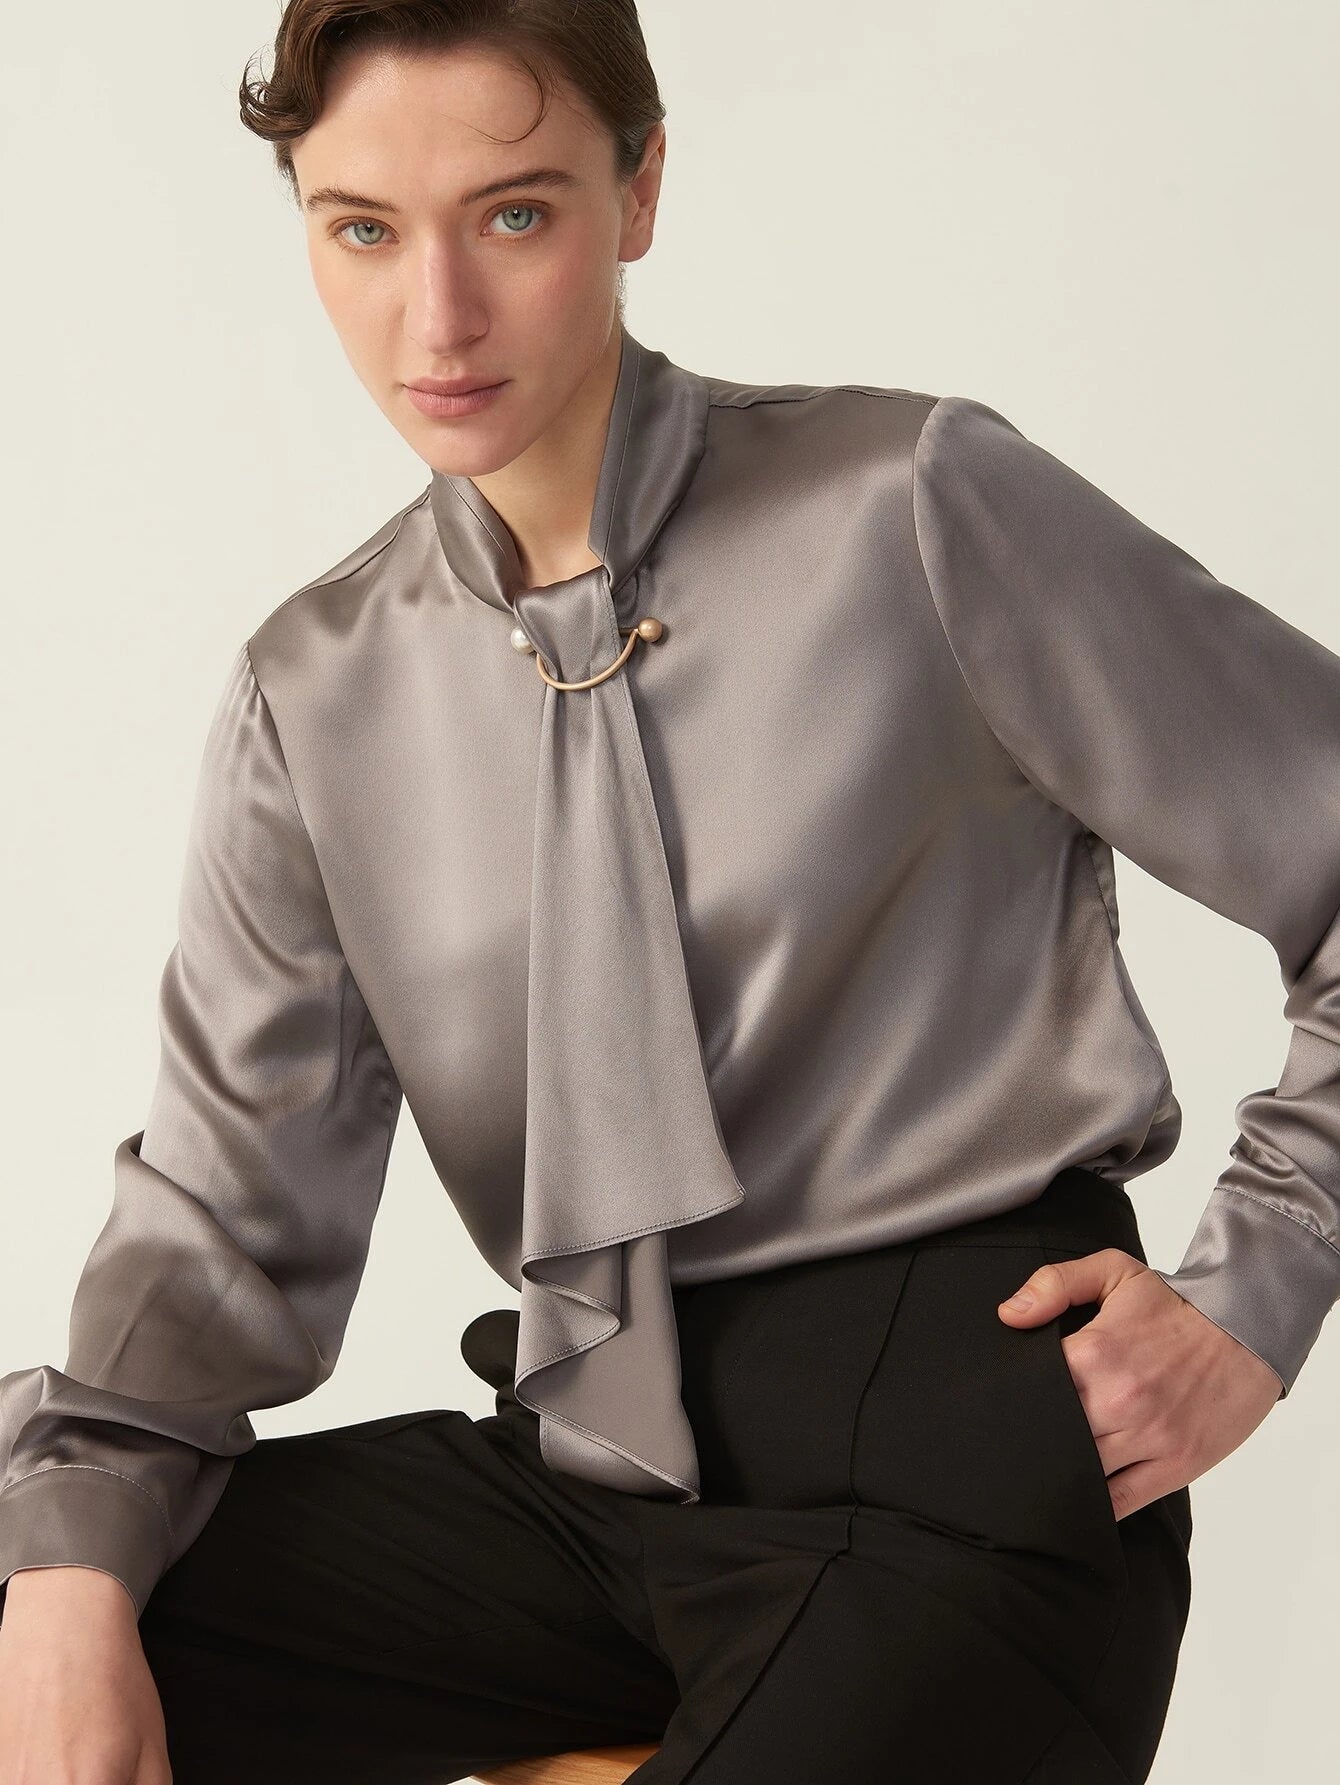 Classic Gorgeous Silk Shirt  Long Sleeves Collared Silk Blouse for Women